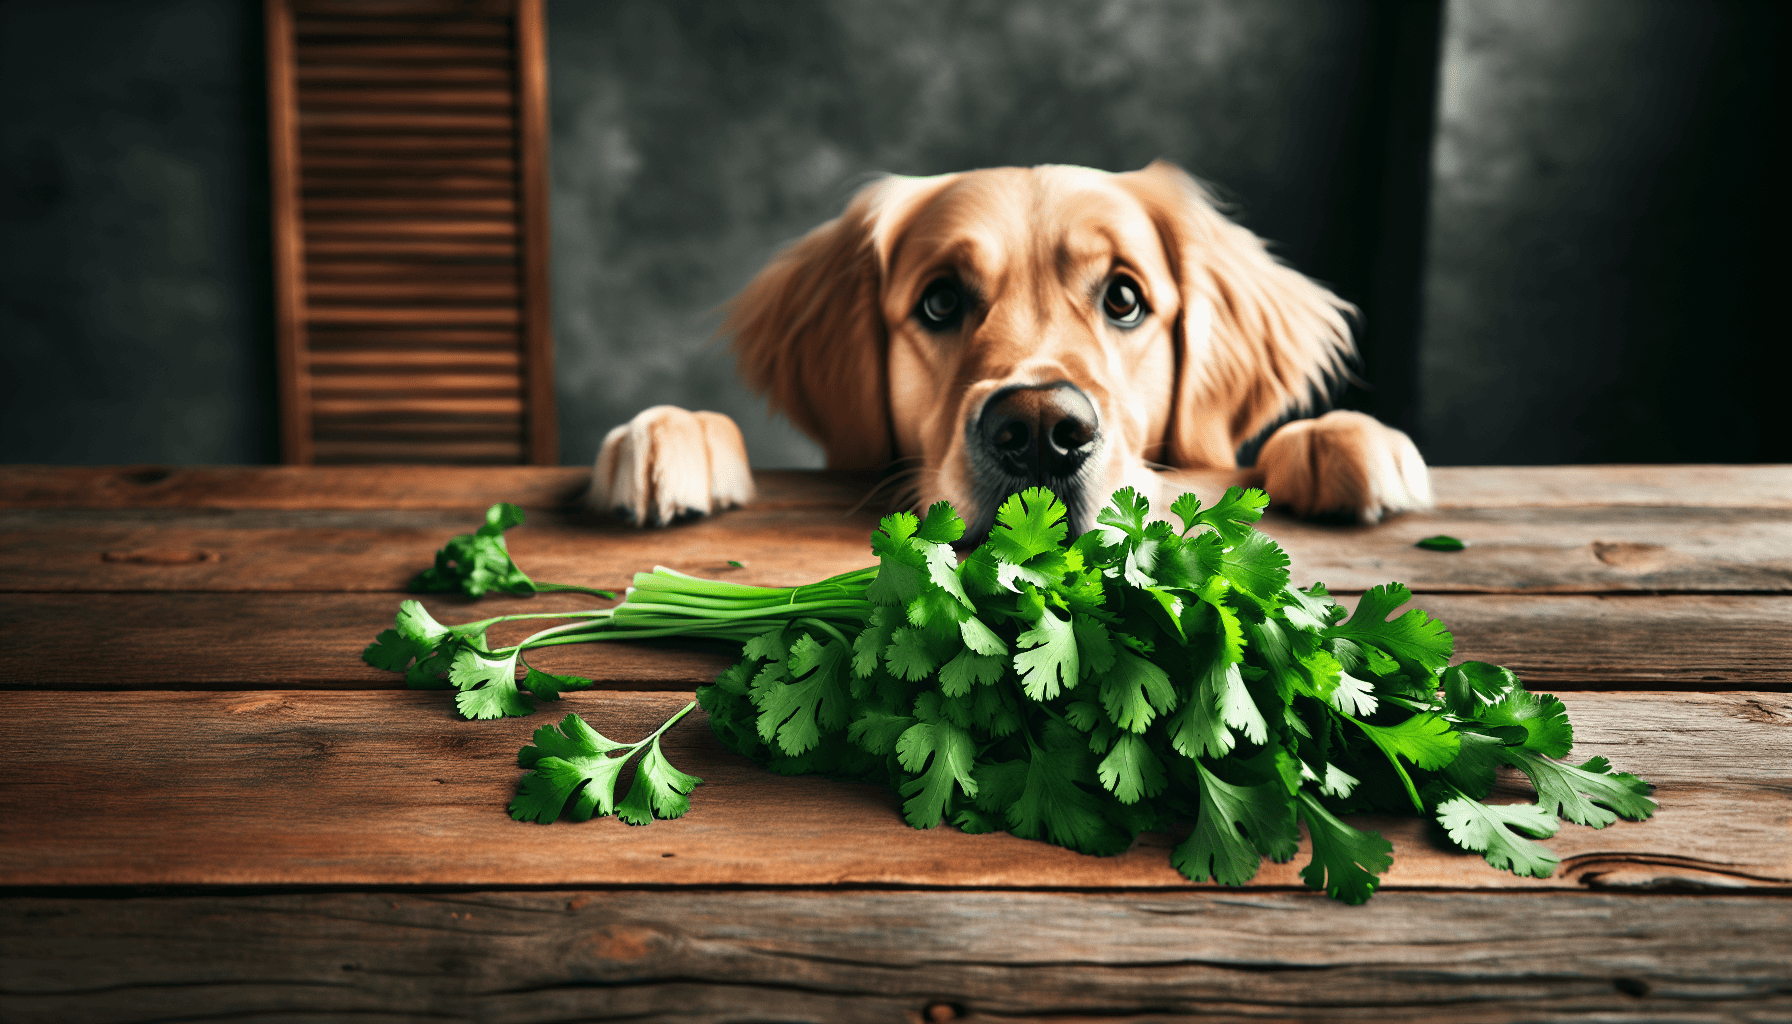 Fresh cilantro leaves and a curious dog